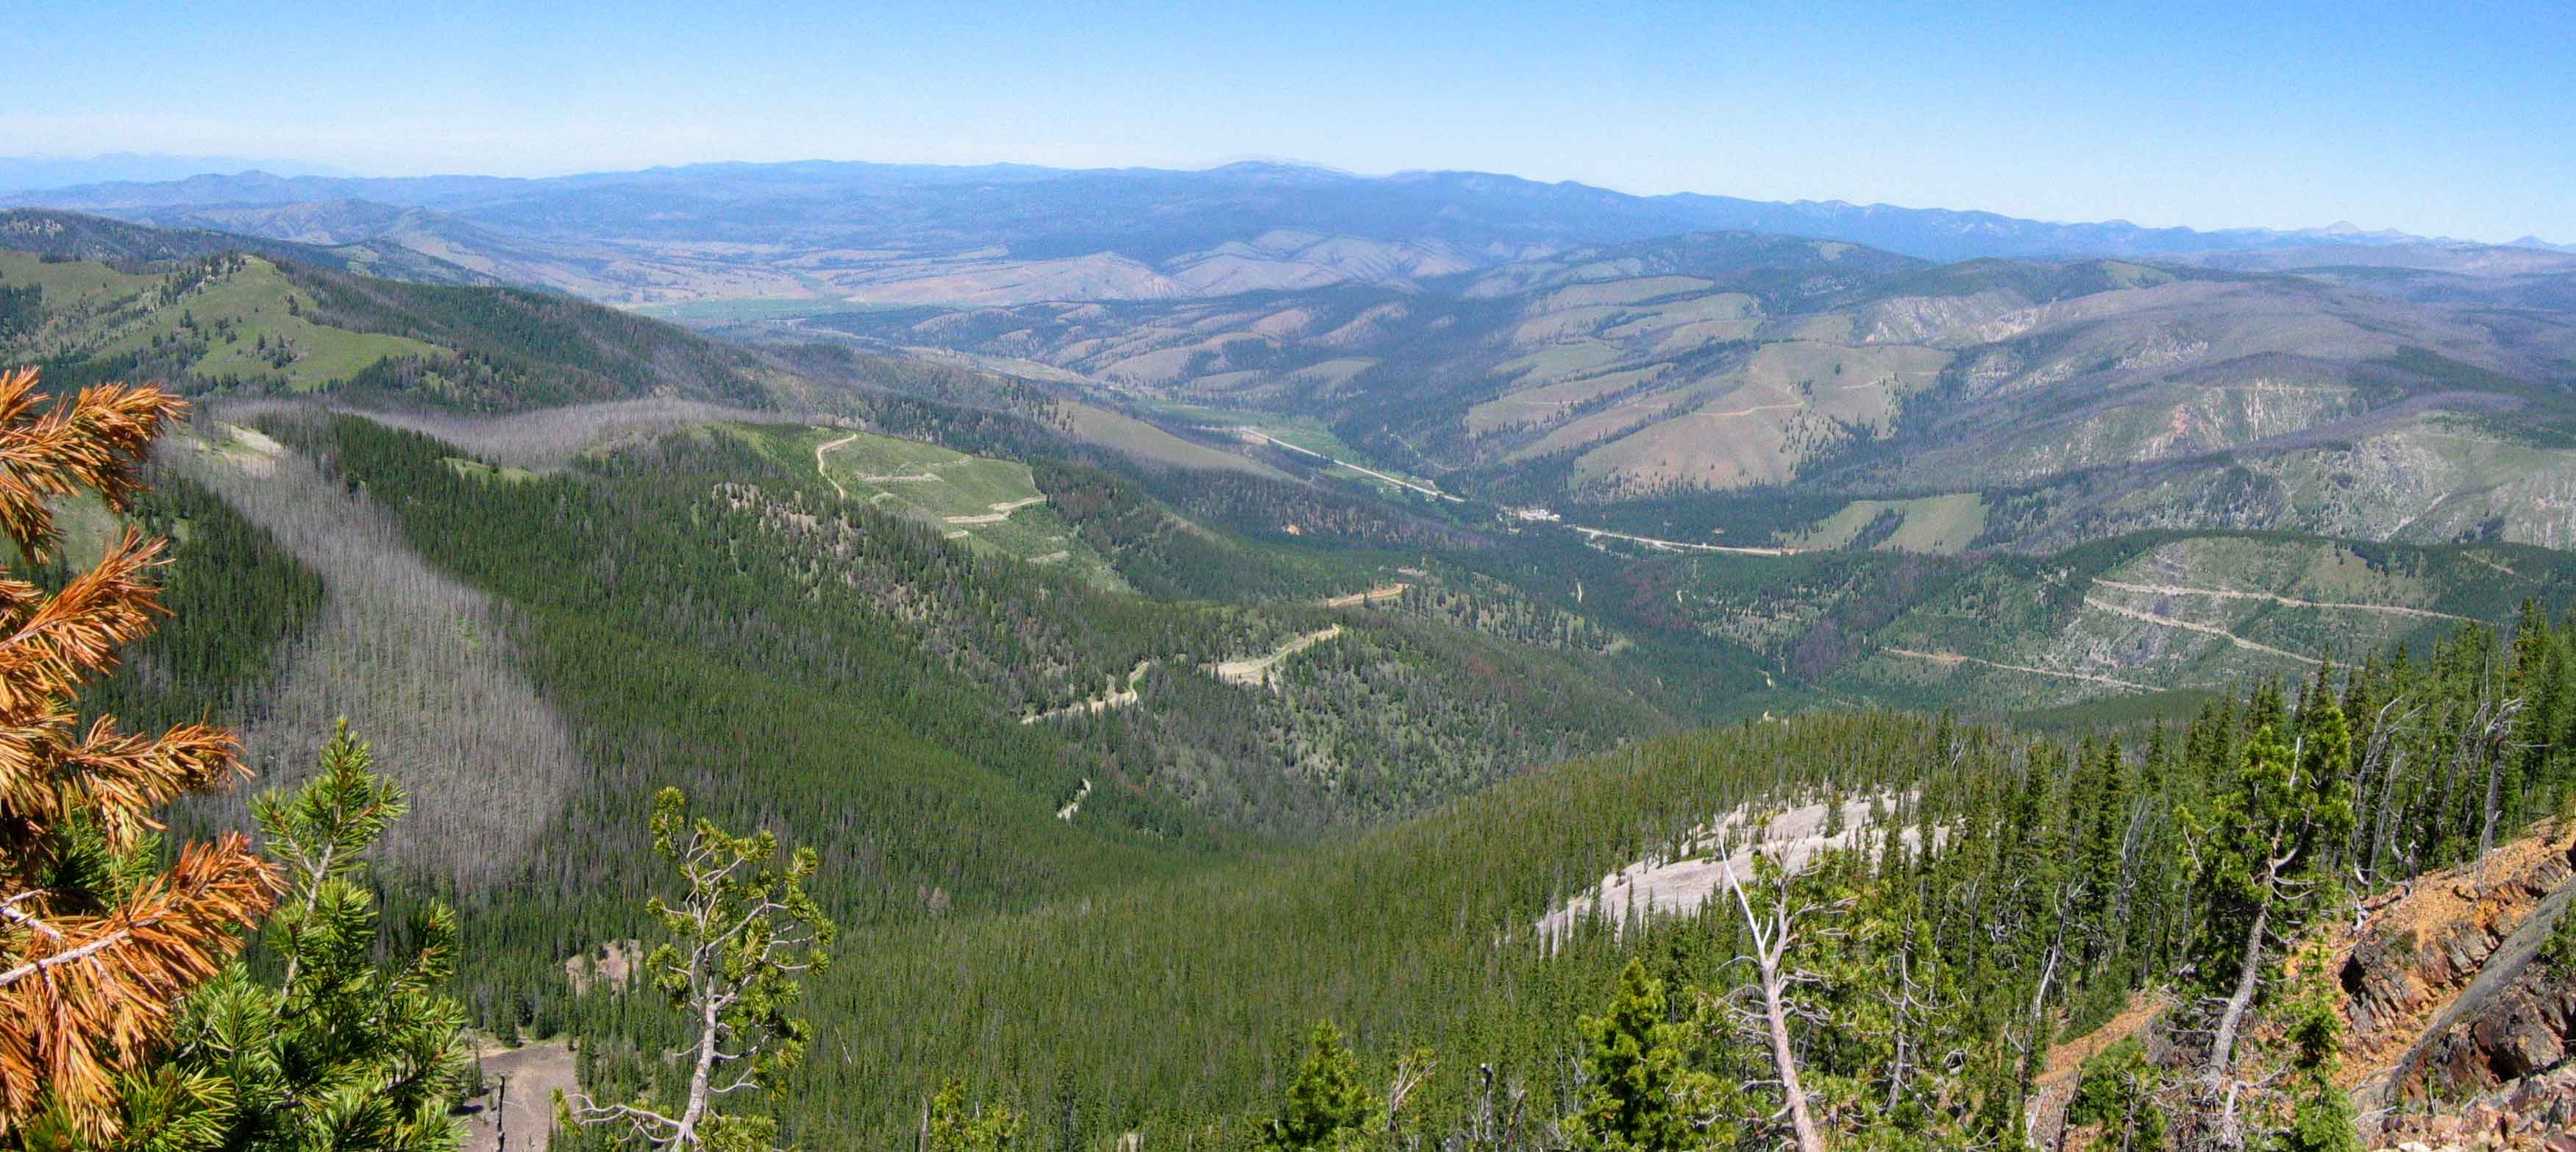 Looking north into the Bitterroot Valley from Saddle Mountain